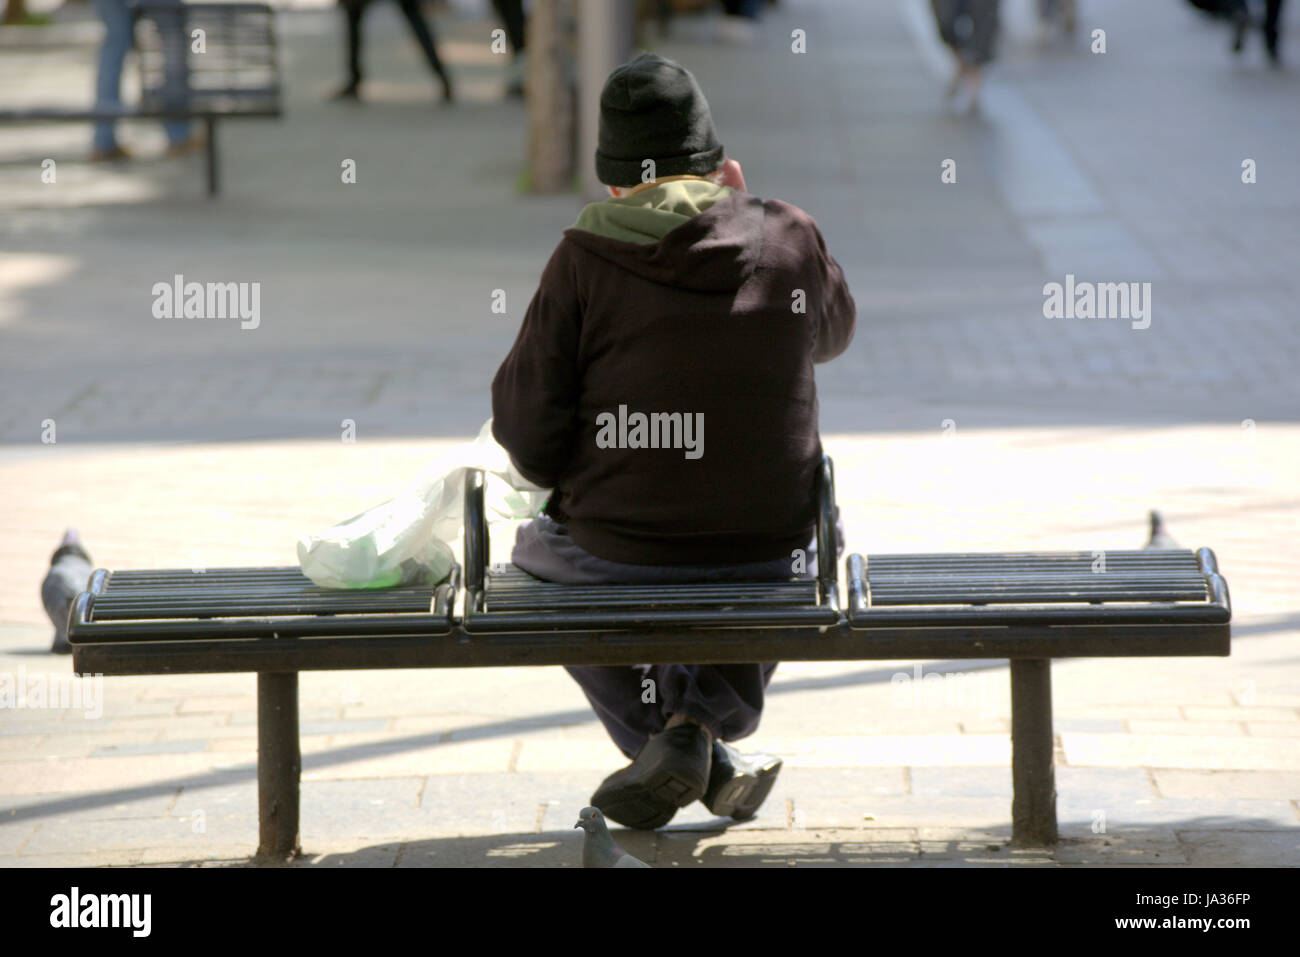 Sauchiehall Street sitting on a bench viewed from behind gnomish man on a mobile phone Stock Photo